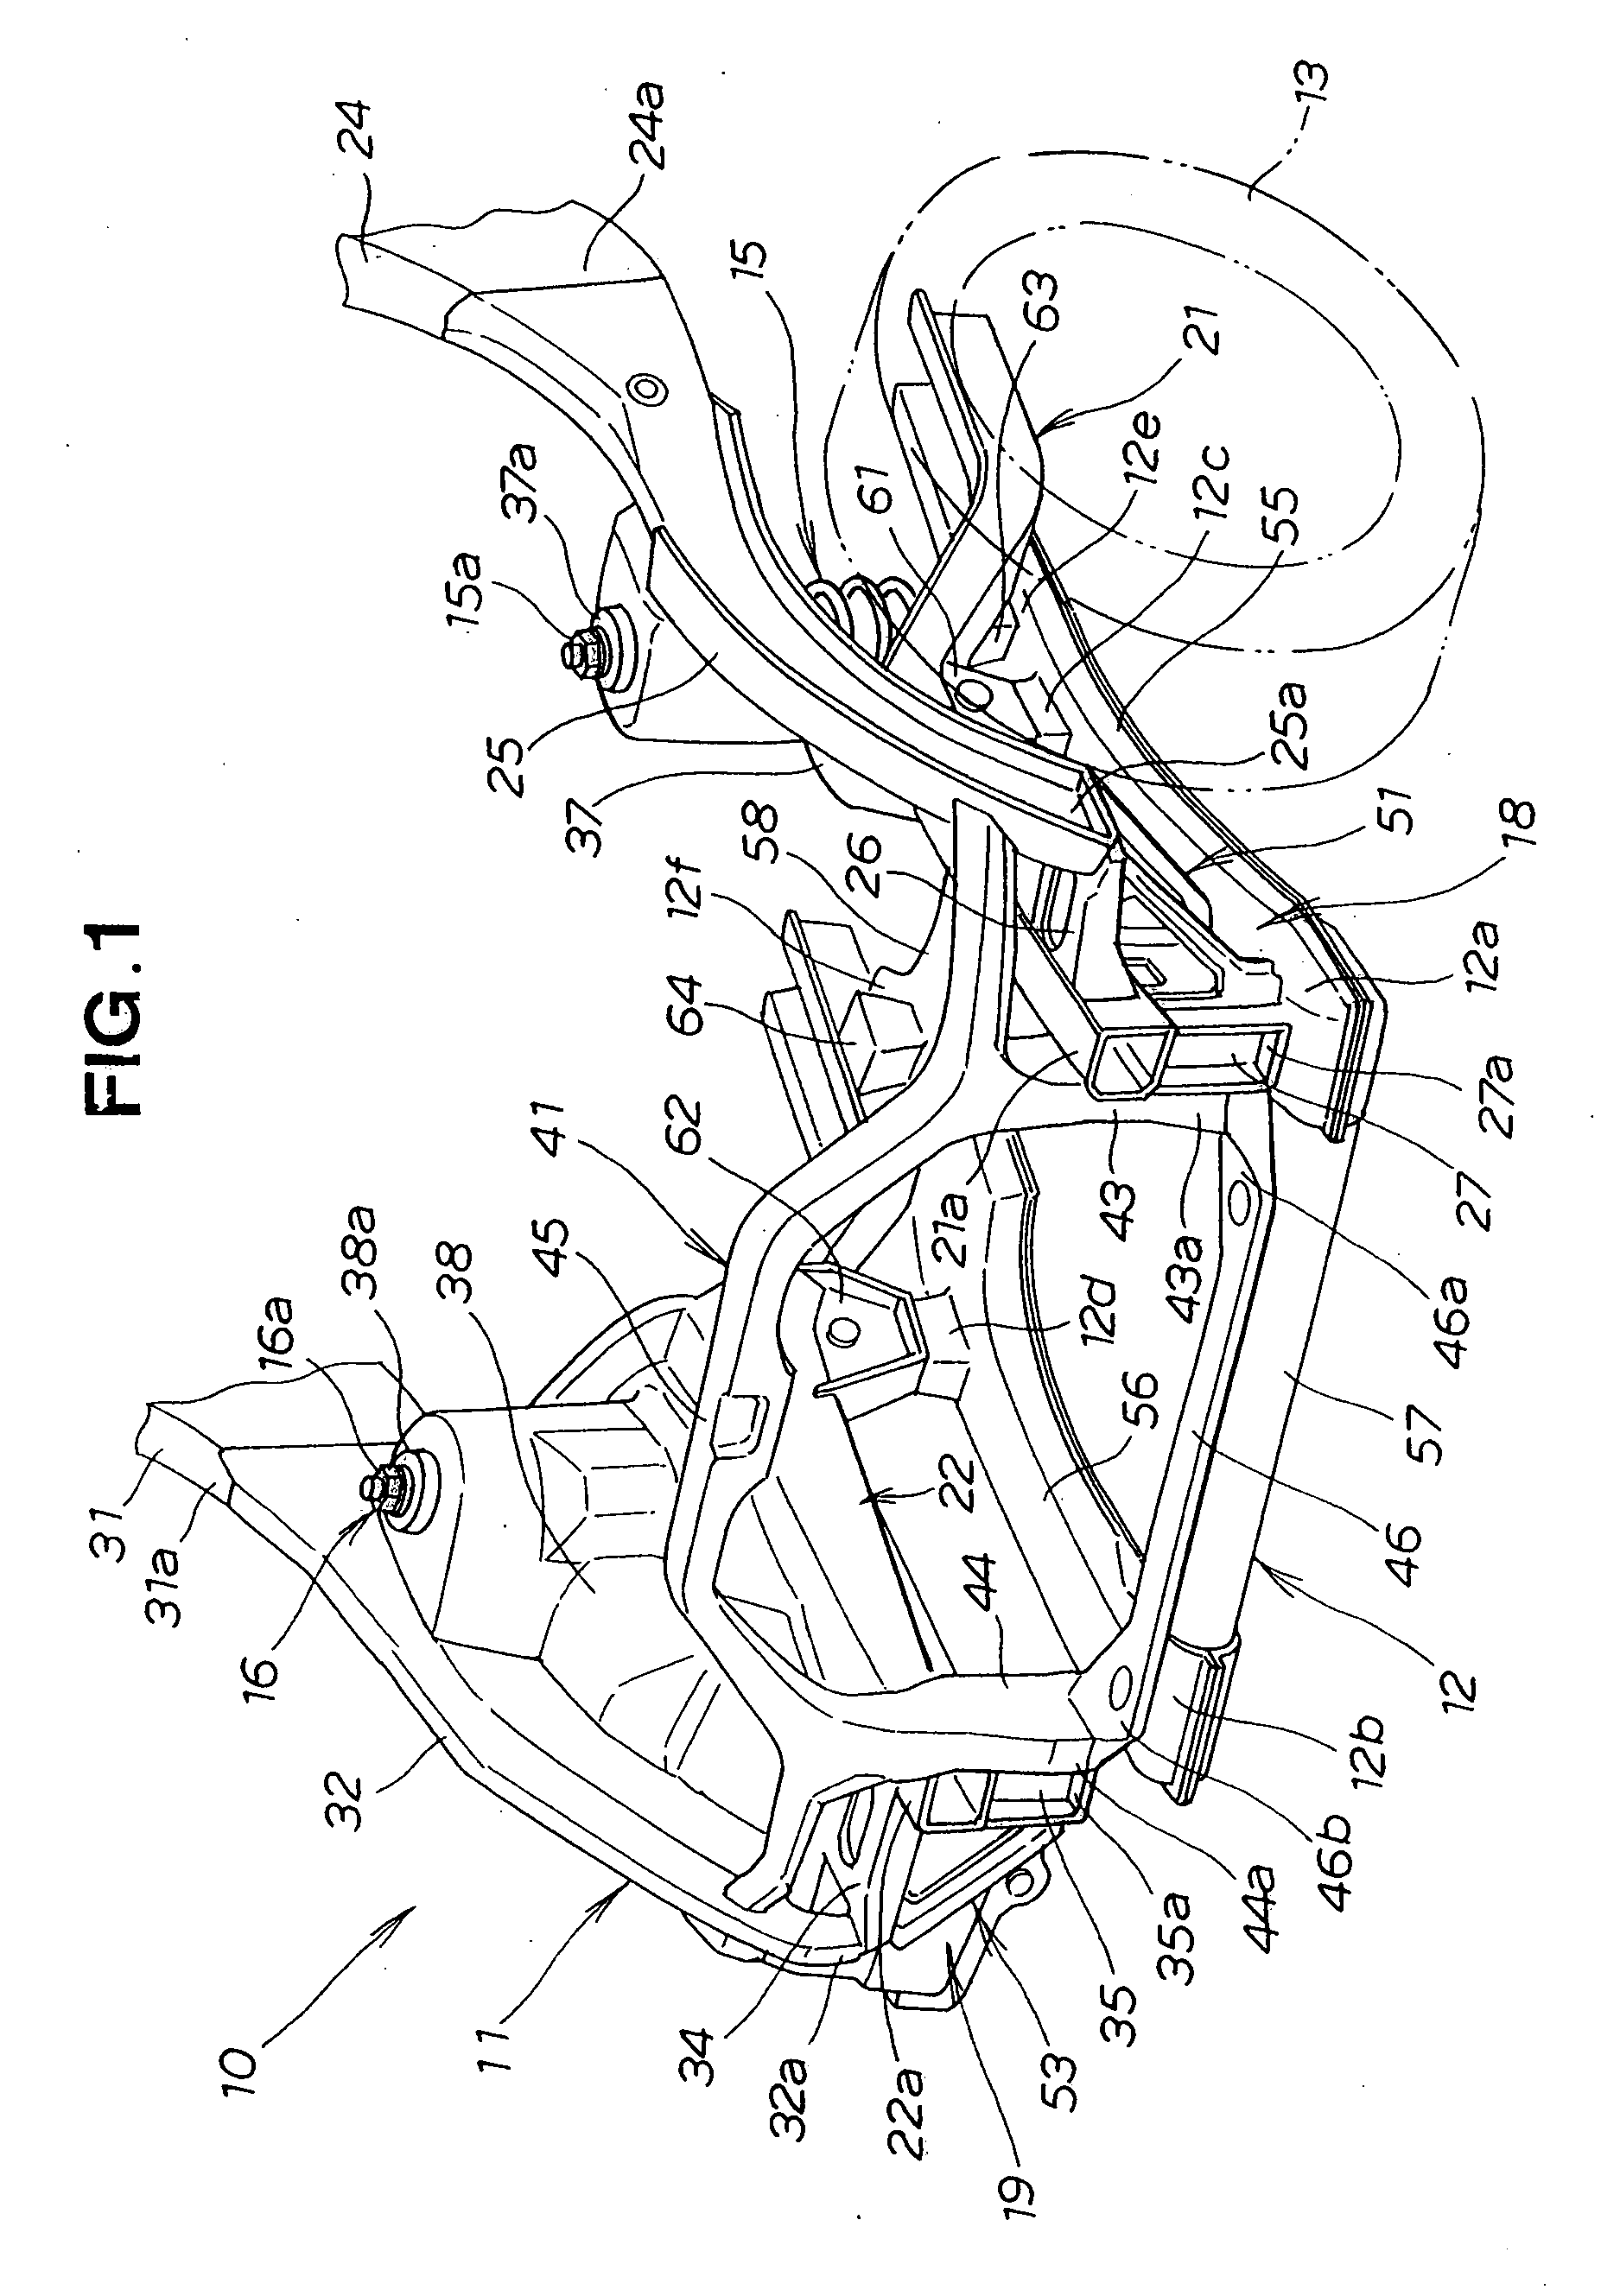 Vehicle front body structure